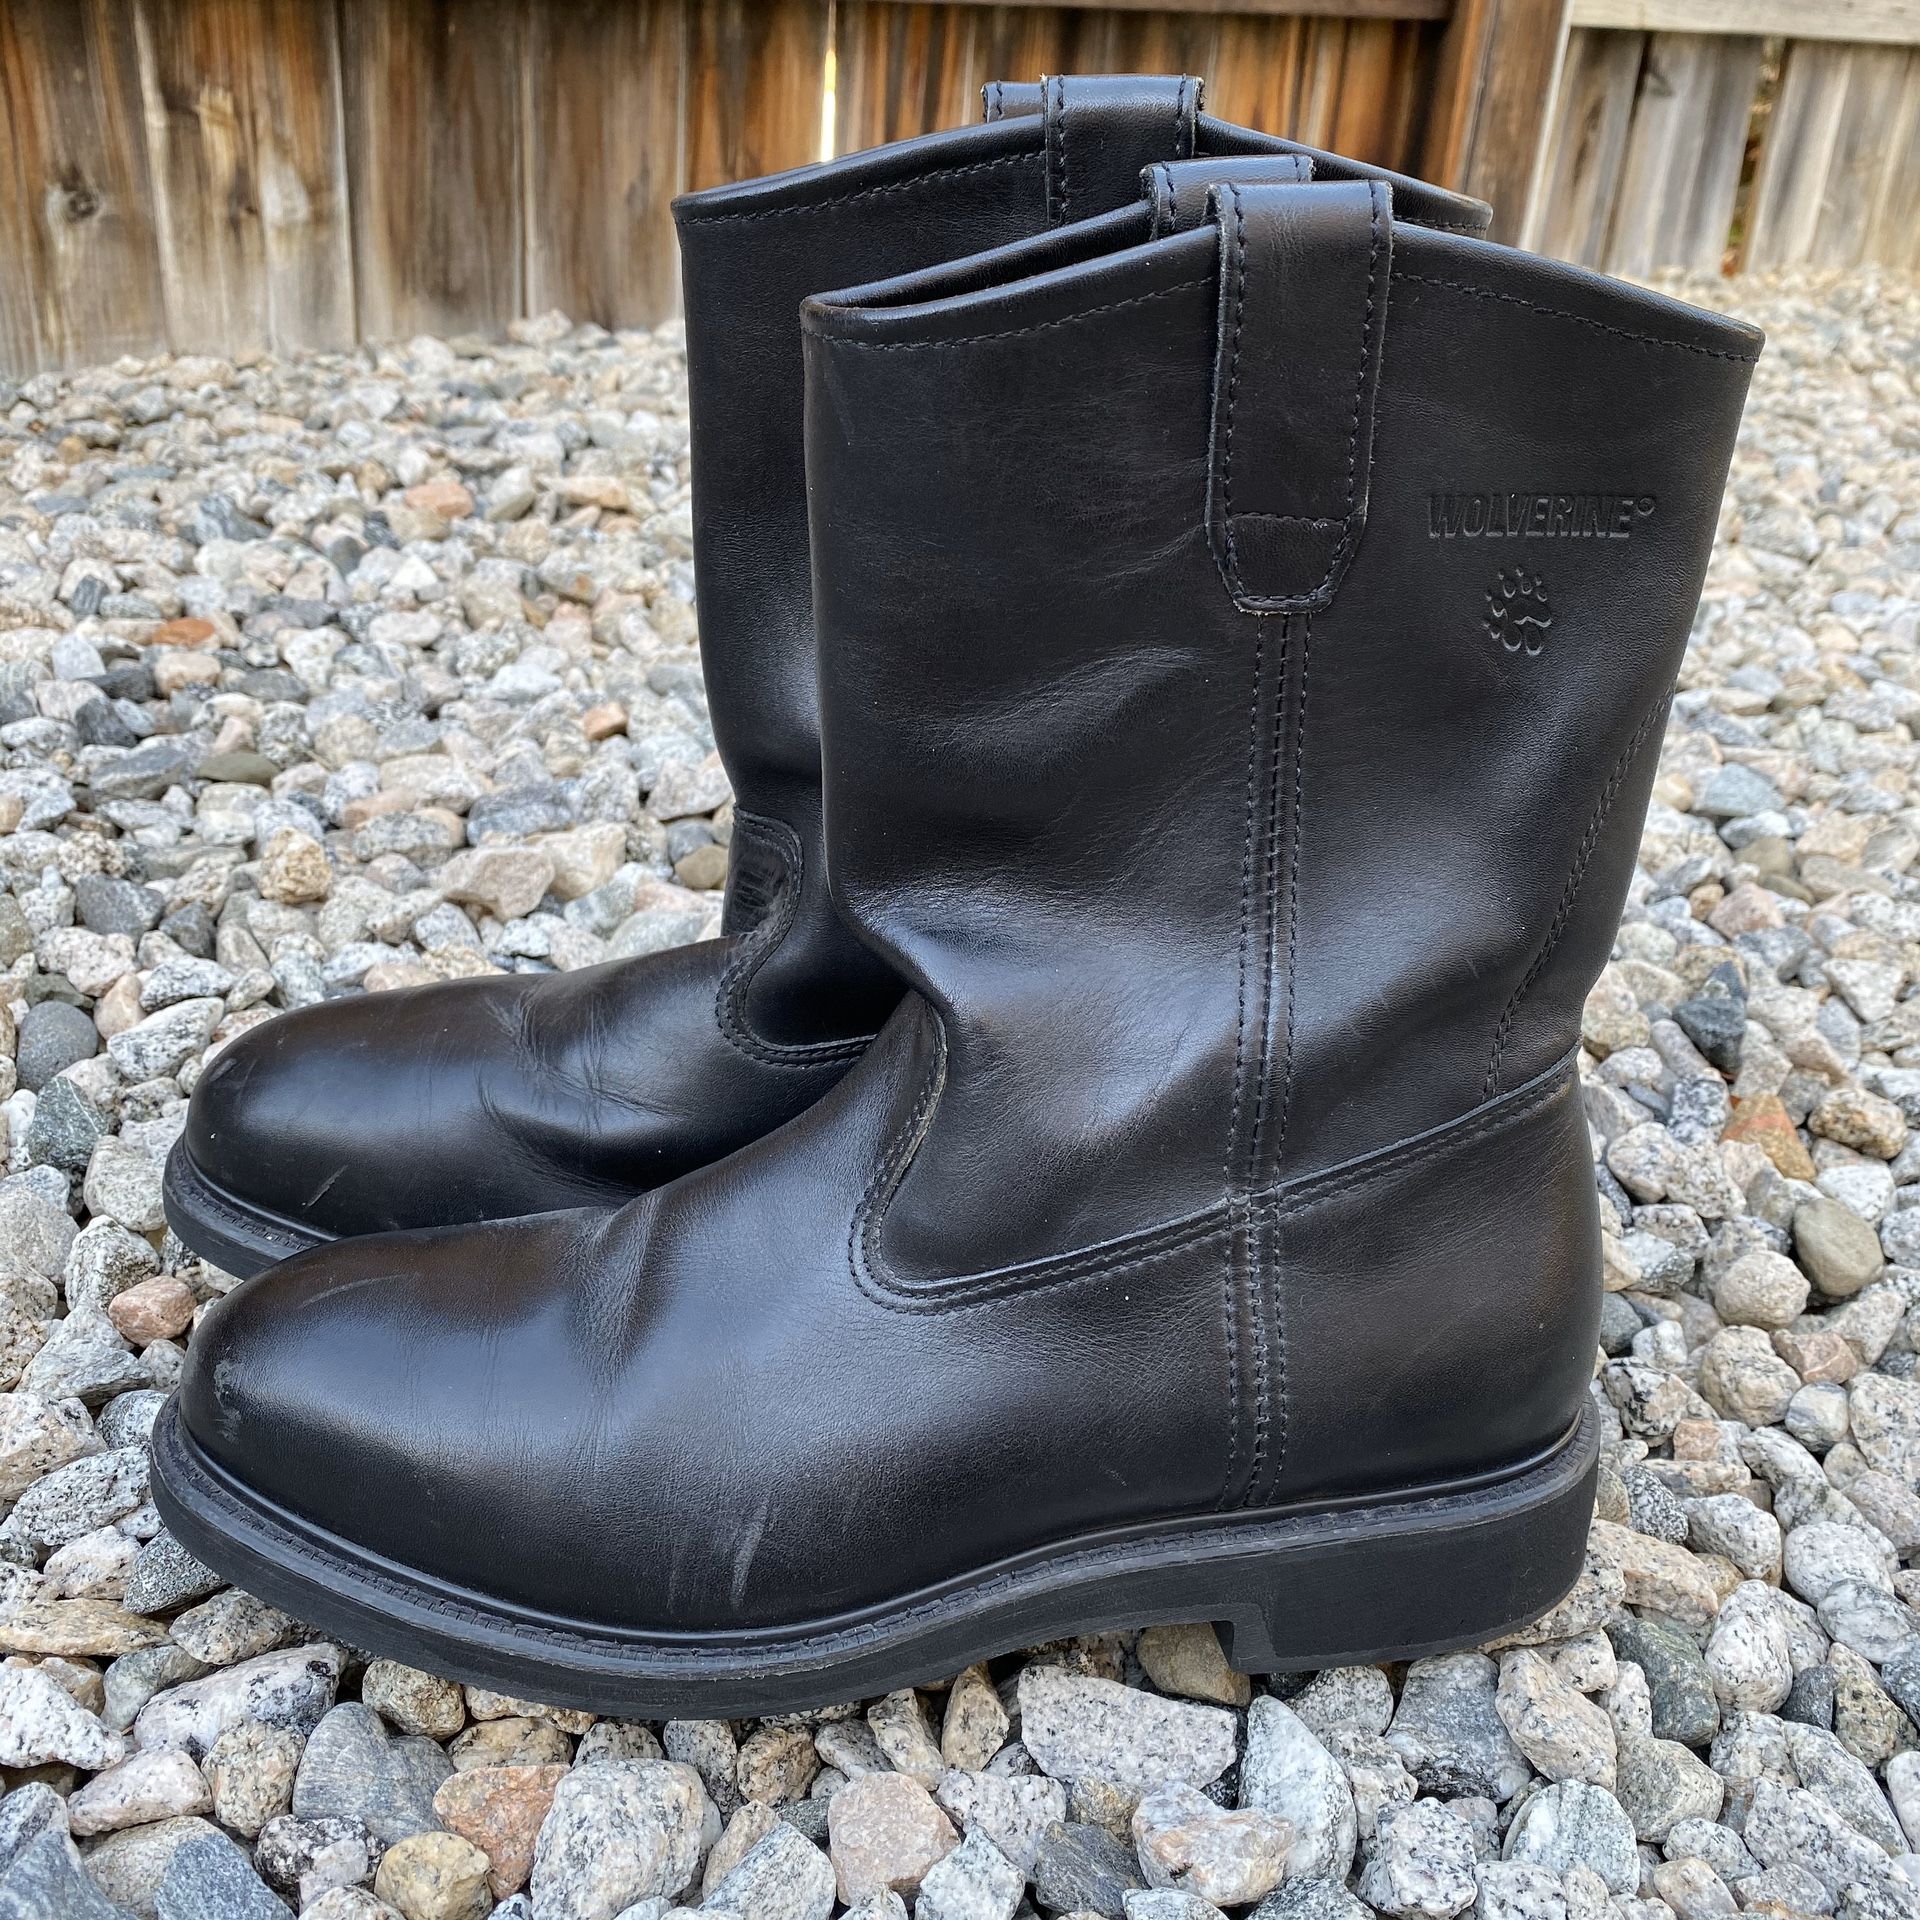 Mens Wolverine Wellington Black Leather Safety Toe Slip Pull On Work Boots 9.5.